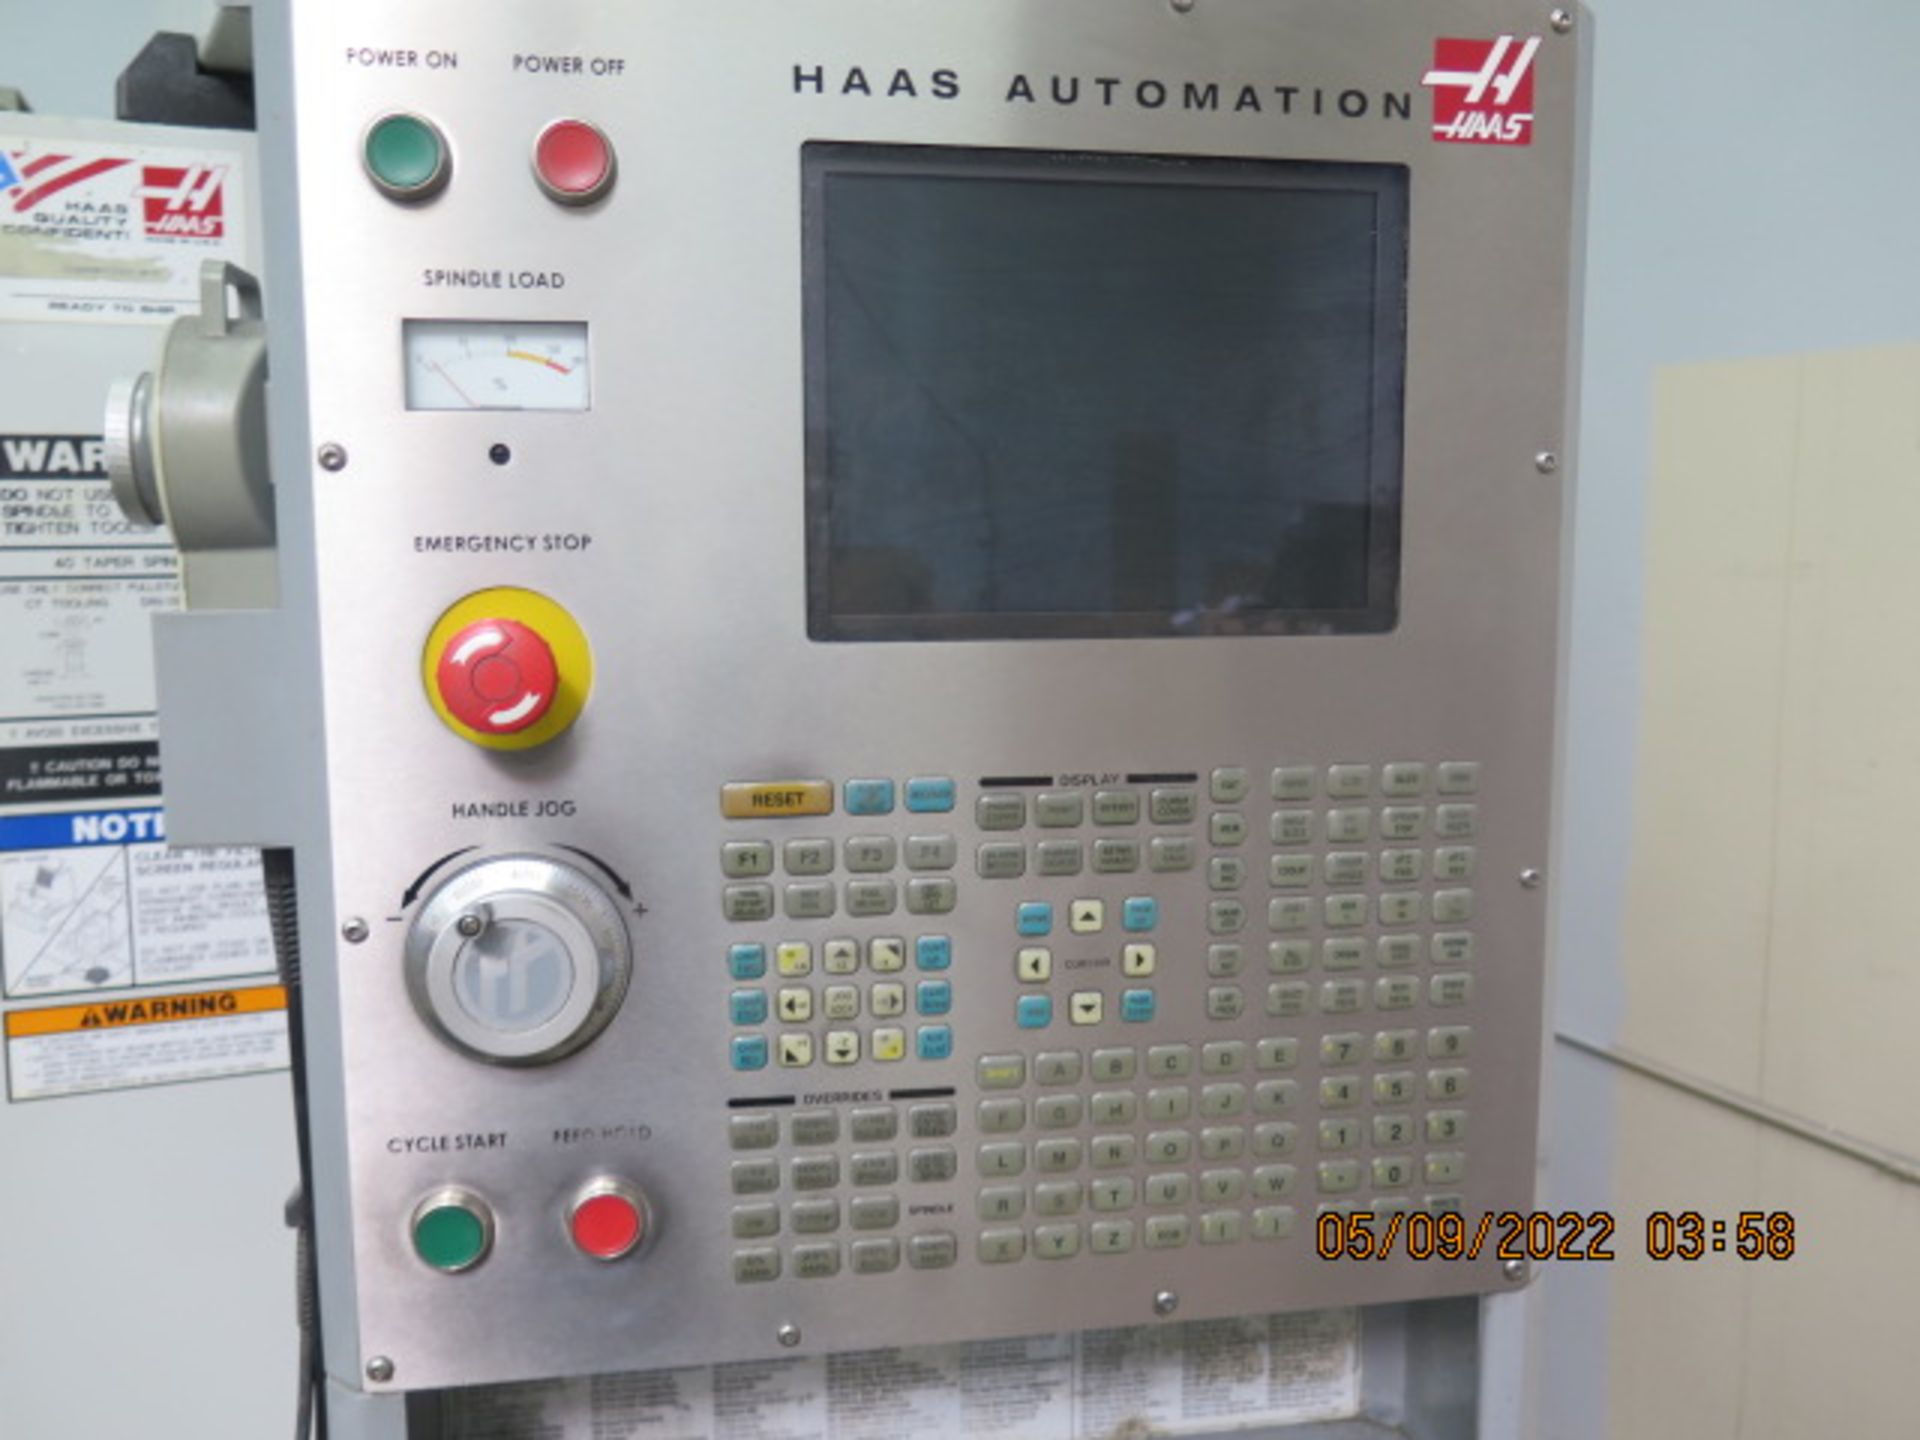 2005 Haas VF-1D CNC VMC s/n 41409 w/ Haas Controls, Hand Wheel, 24-Station ATC, SOLD AS IS - Image 12 of 16